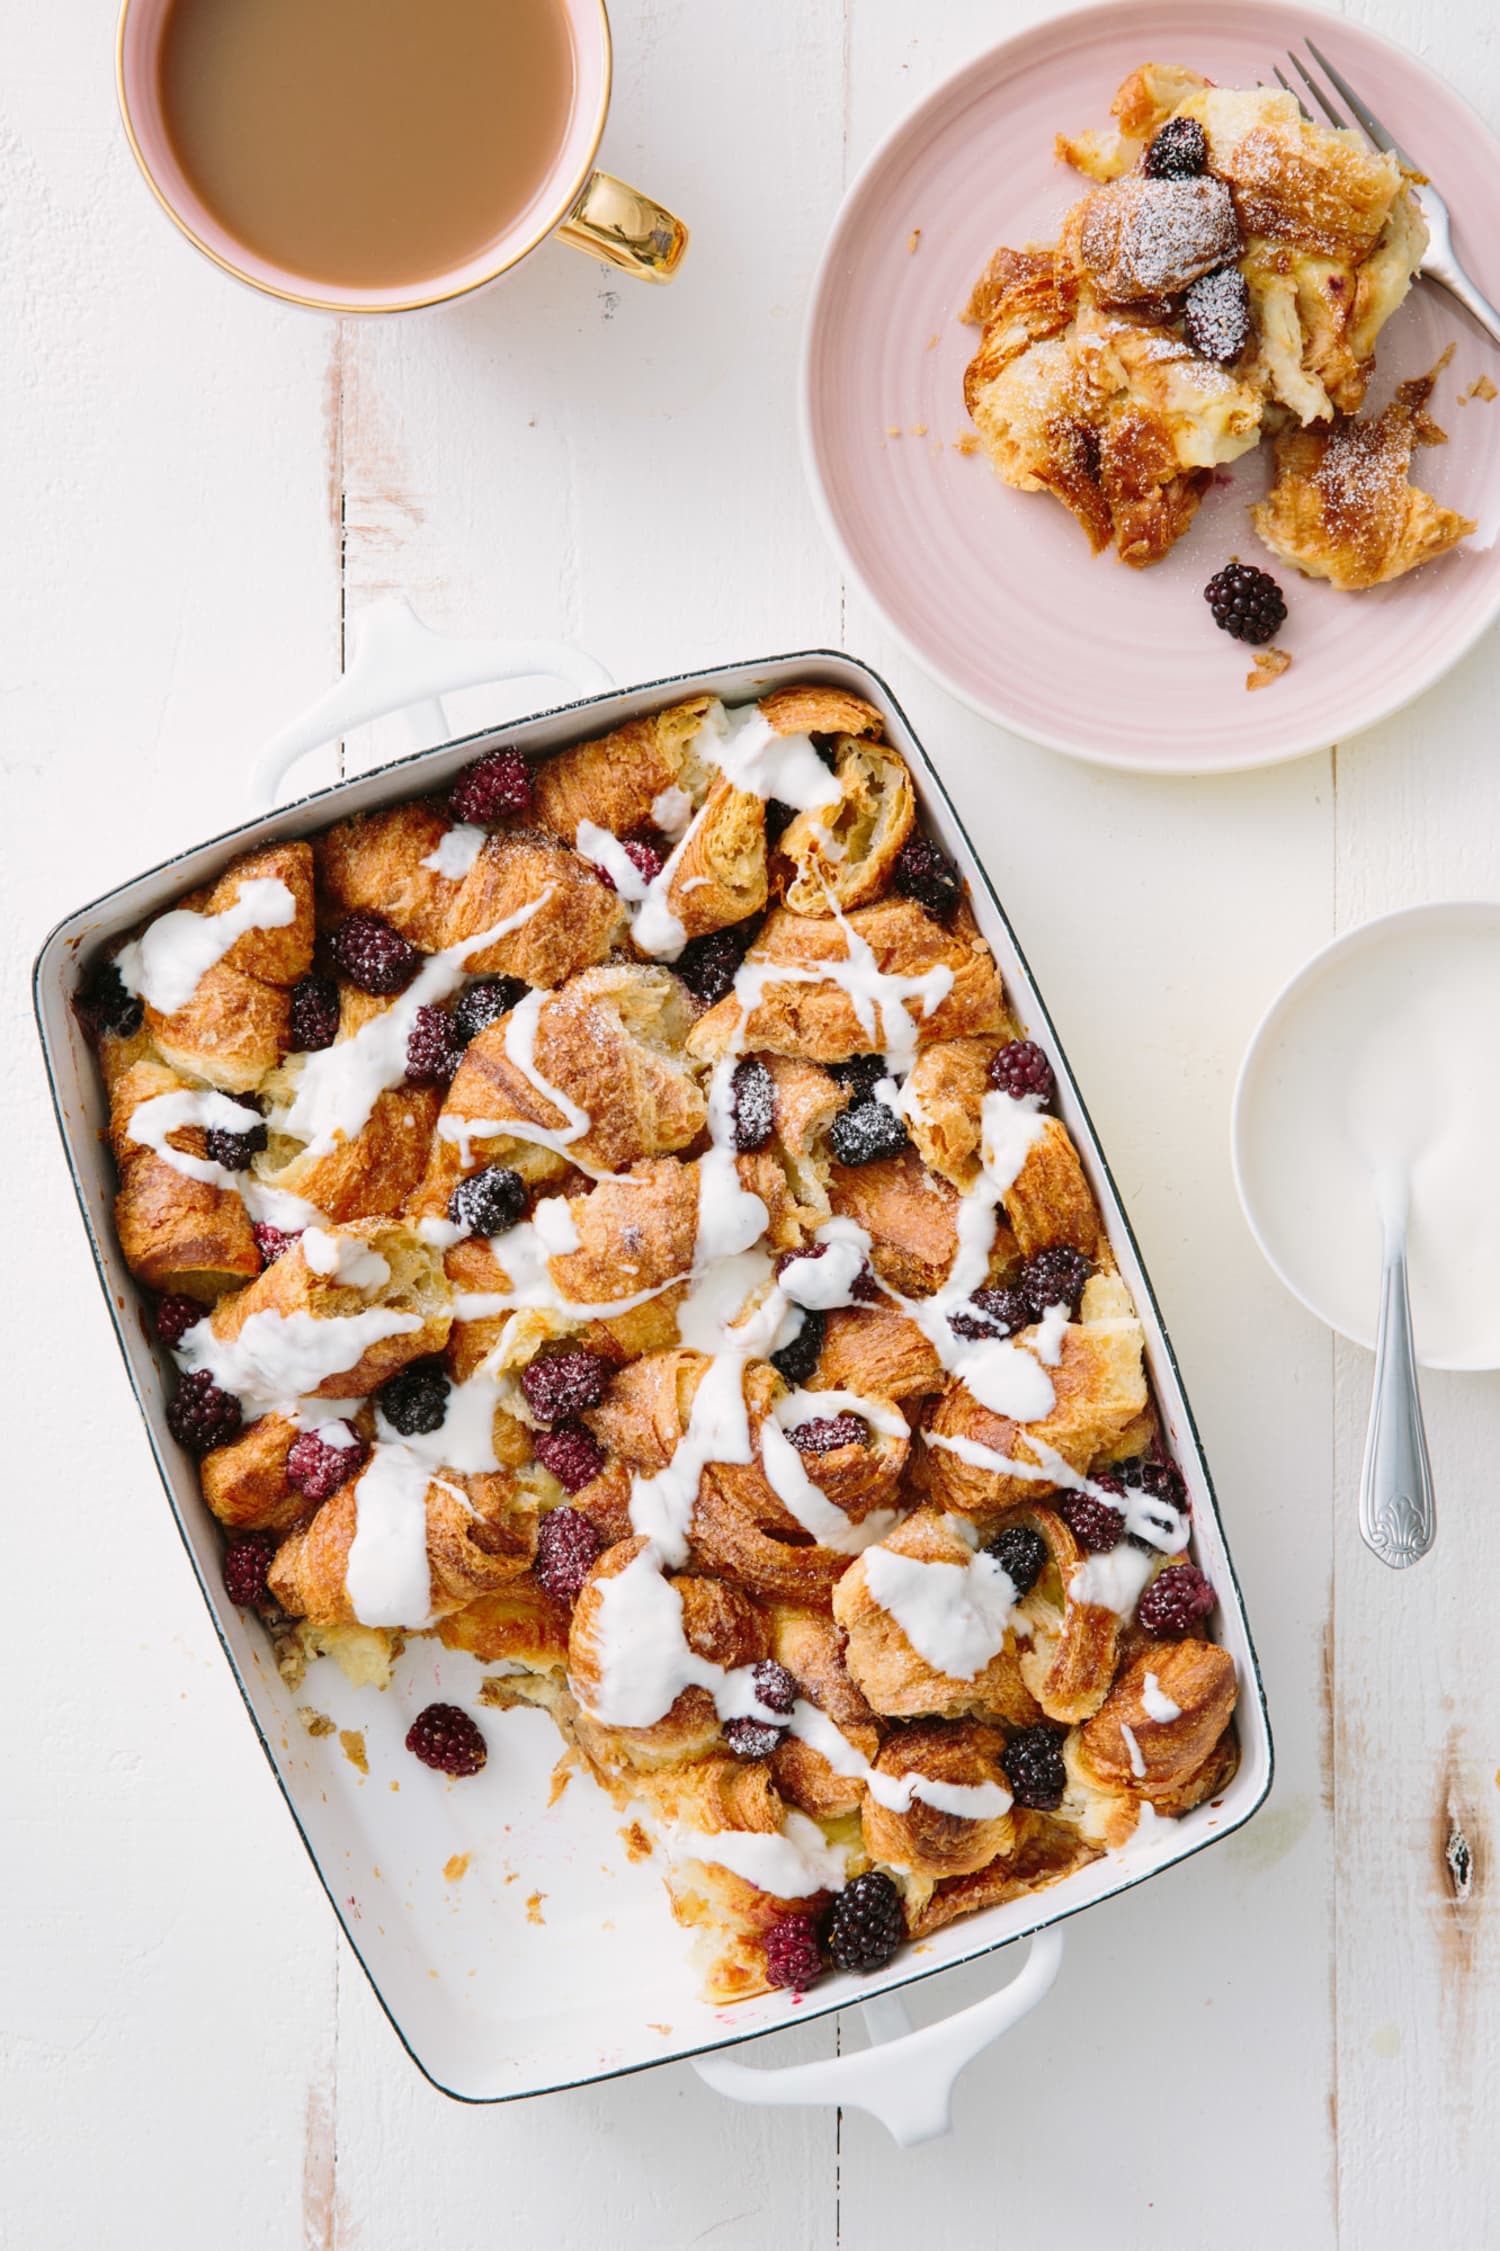 20 Delicious Breakfast Casseroles for Christmas Morning | Kitchn